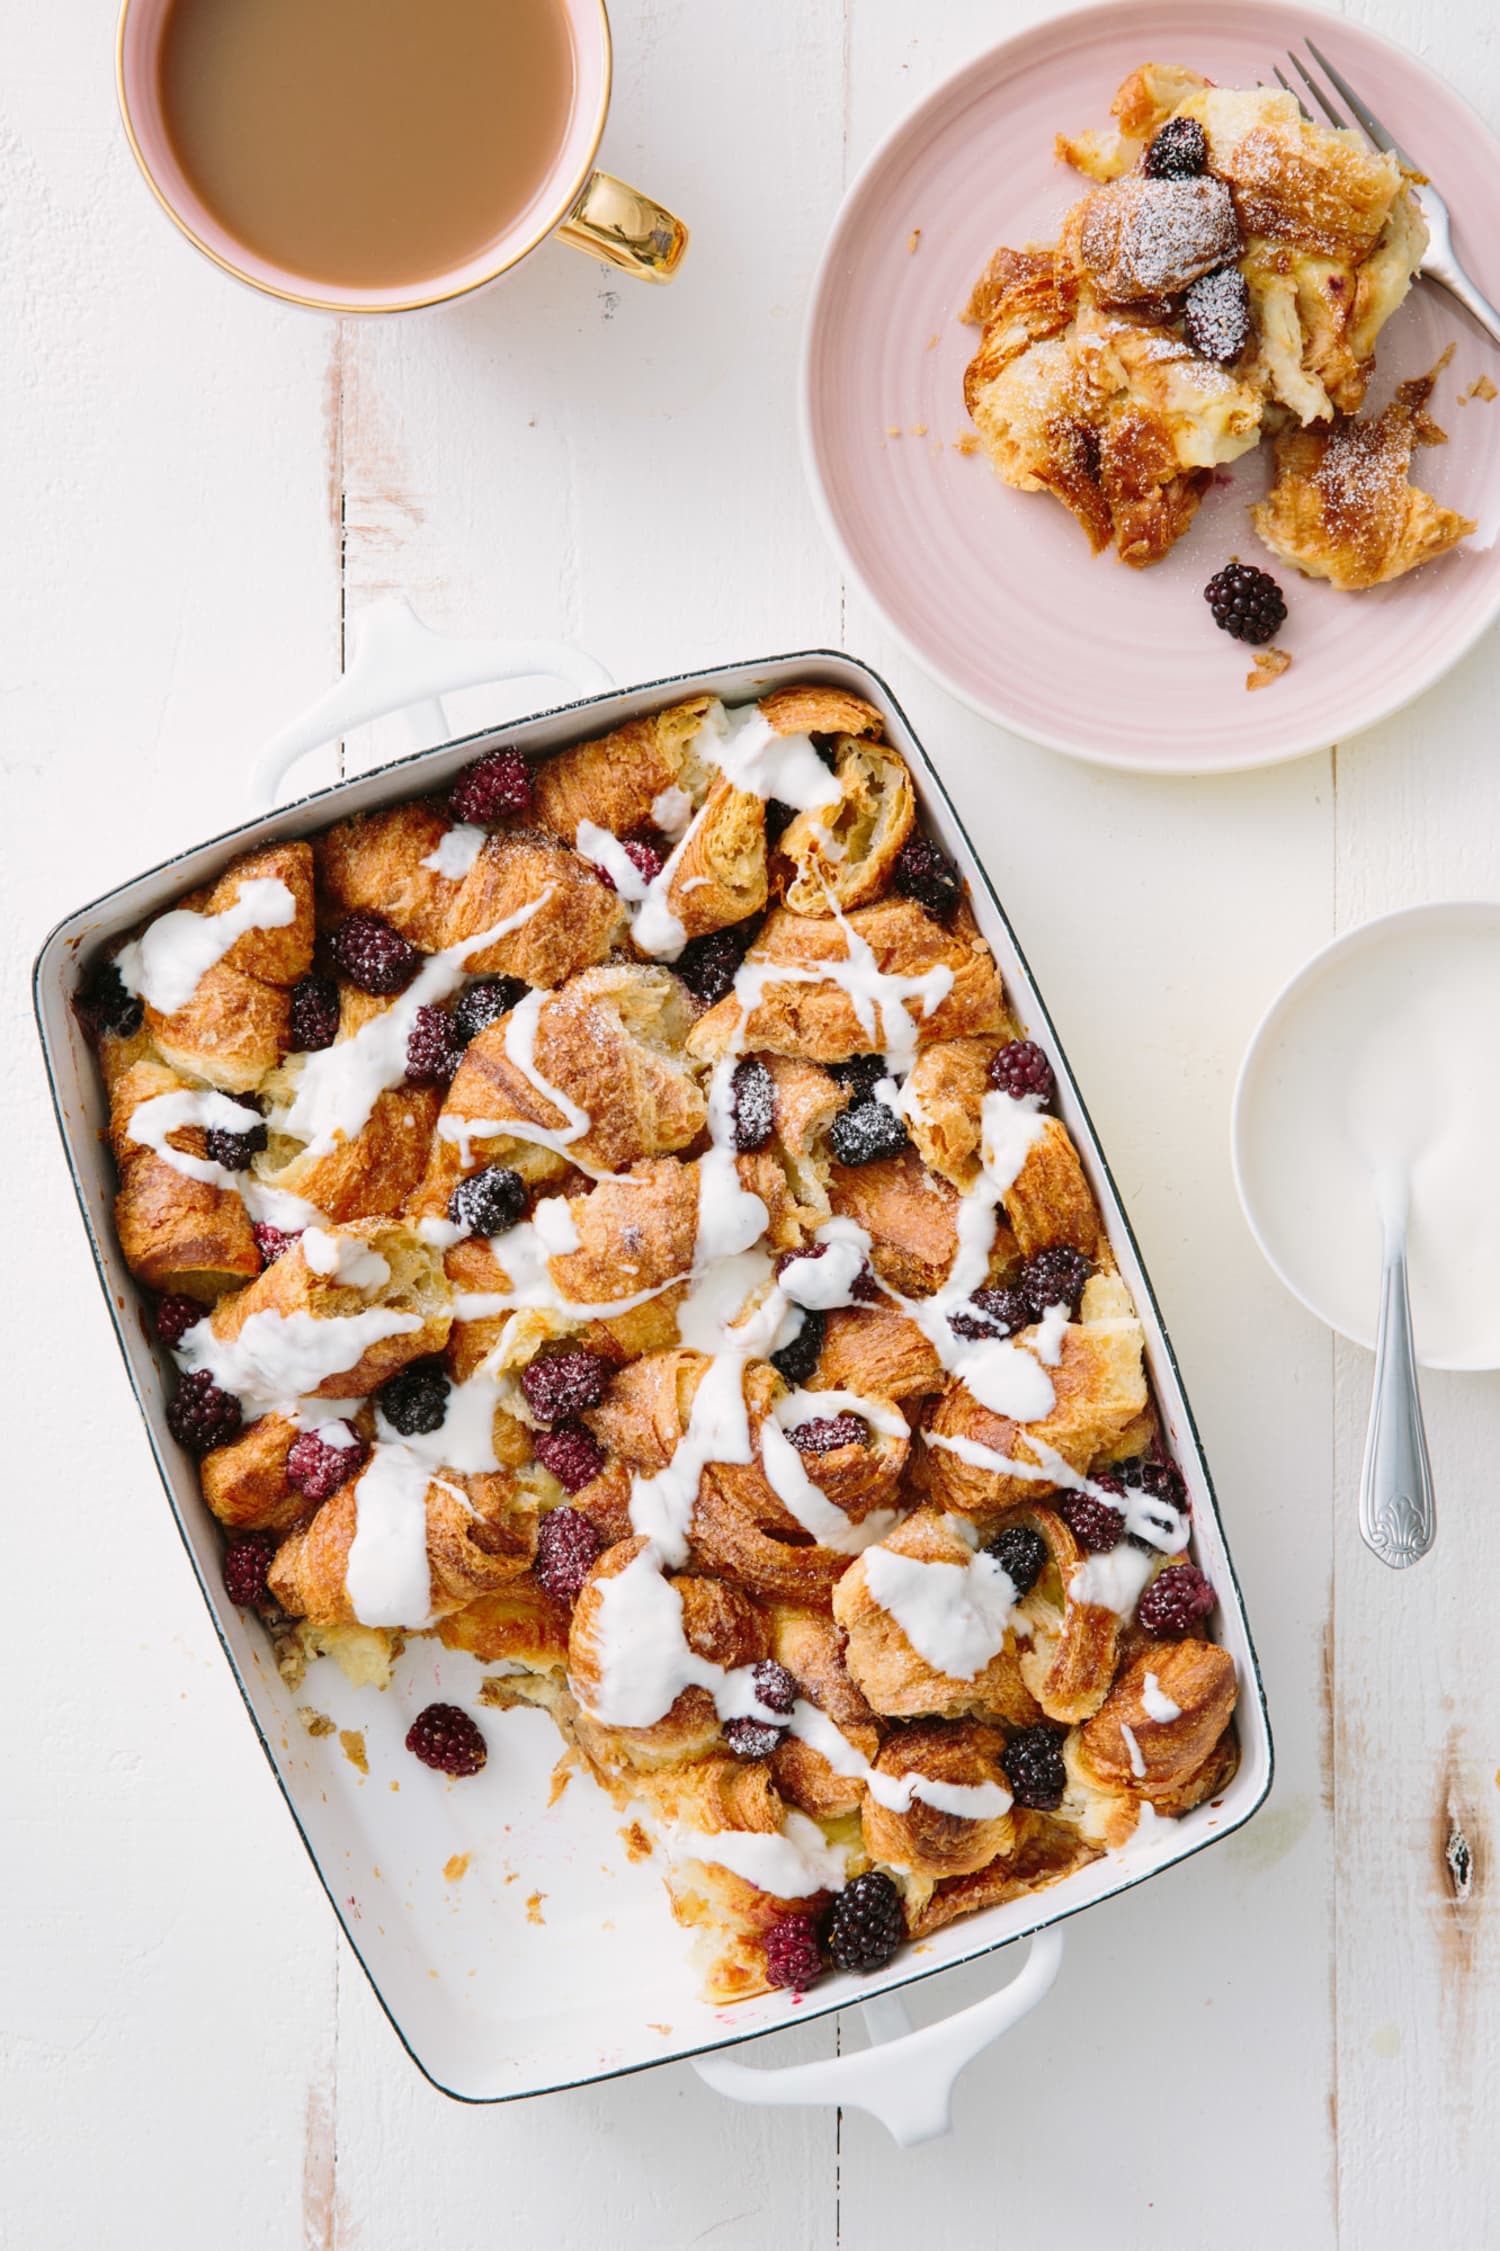 20 Delicious Breakfast Casseroles for Christmas Morning | Kitchn